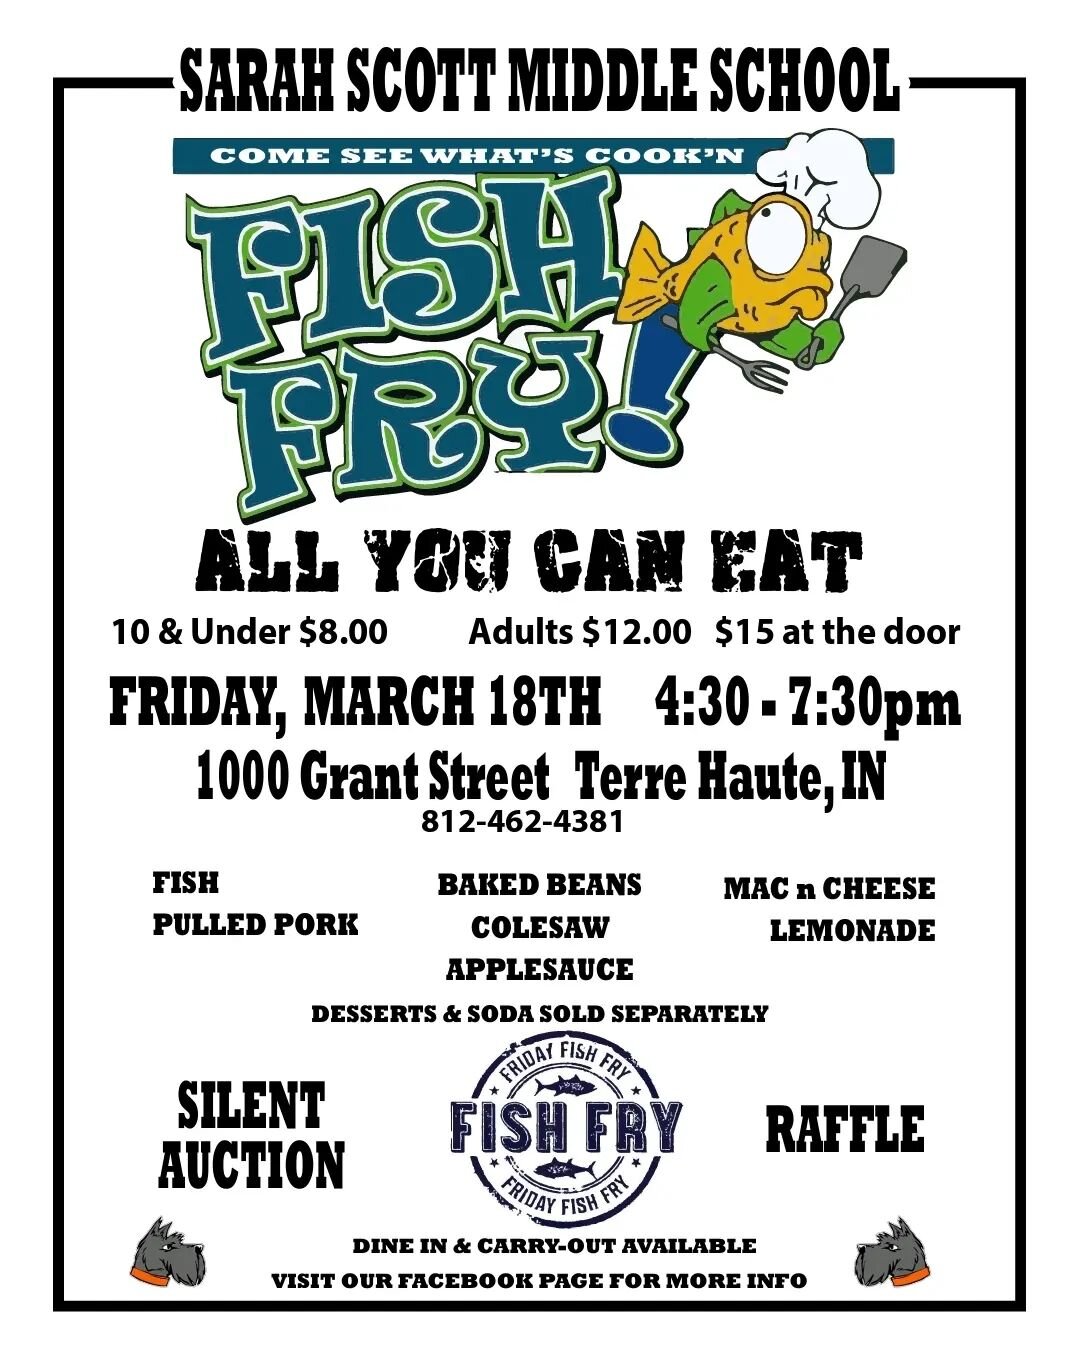 Anyone interested in supporting Sarah Scott by purchasing tickets to the Fish Fry? 

&bull;Friday, March 18th 4:30-7:30pm @ Sarah Scott Middle School.

&bull;ALL YOU CAN EAT!

&bull;Adults $12, Children 10 &amp; under $8.00 pre-purchase.
($15 at the 